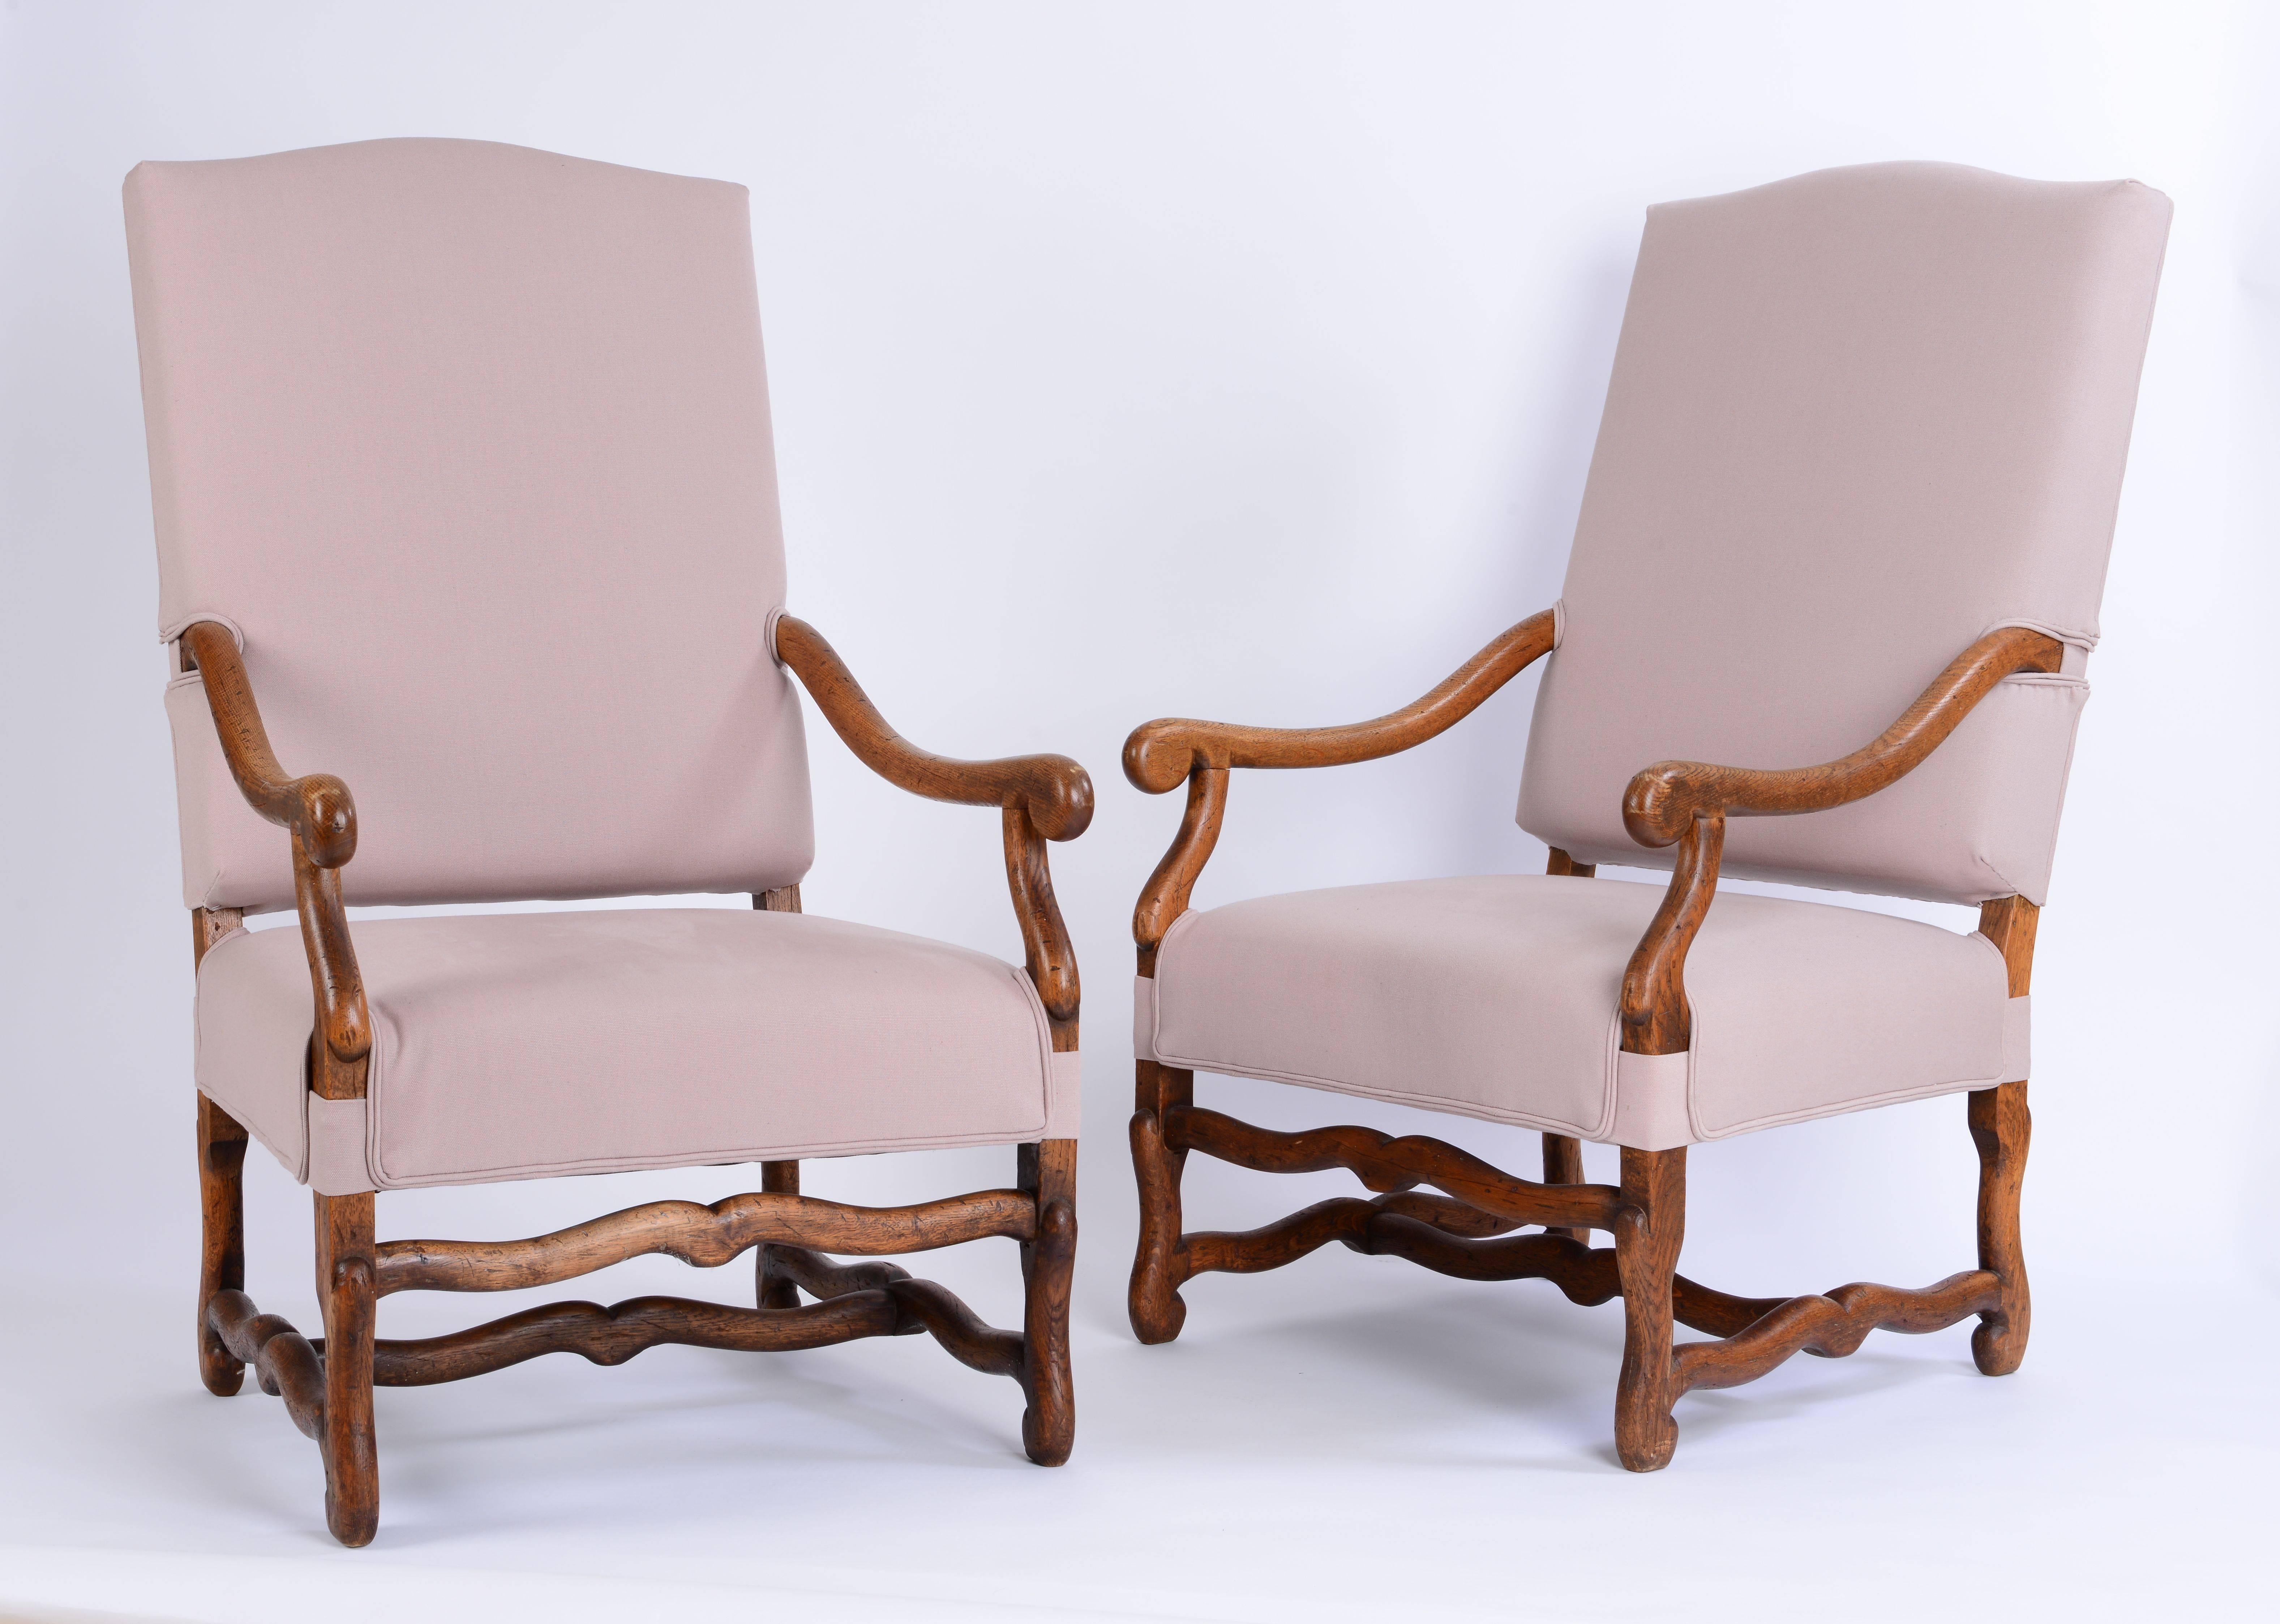 Essential for a touch of Belgian style the Os de Mouton armchair. This beautiful large pair in oak has a lovely patina, is very heavy and sturdy and extremely comfortable. Recently reupholstered by us in pinkish, incredibly soft Belgian